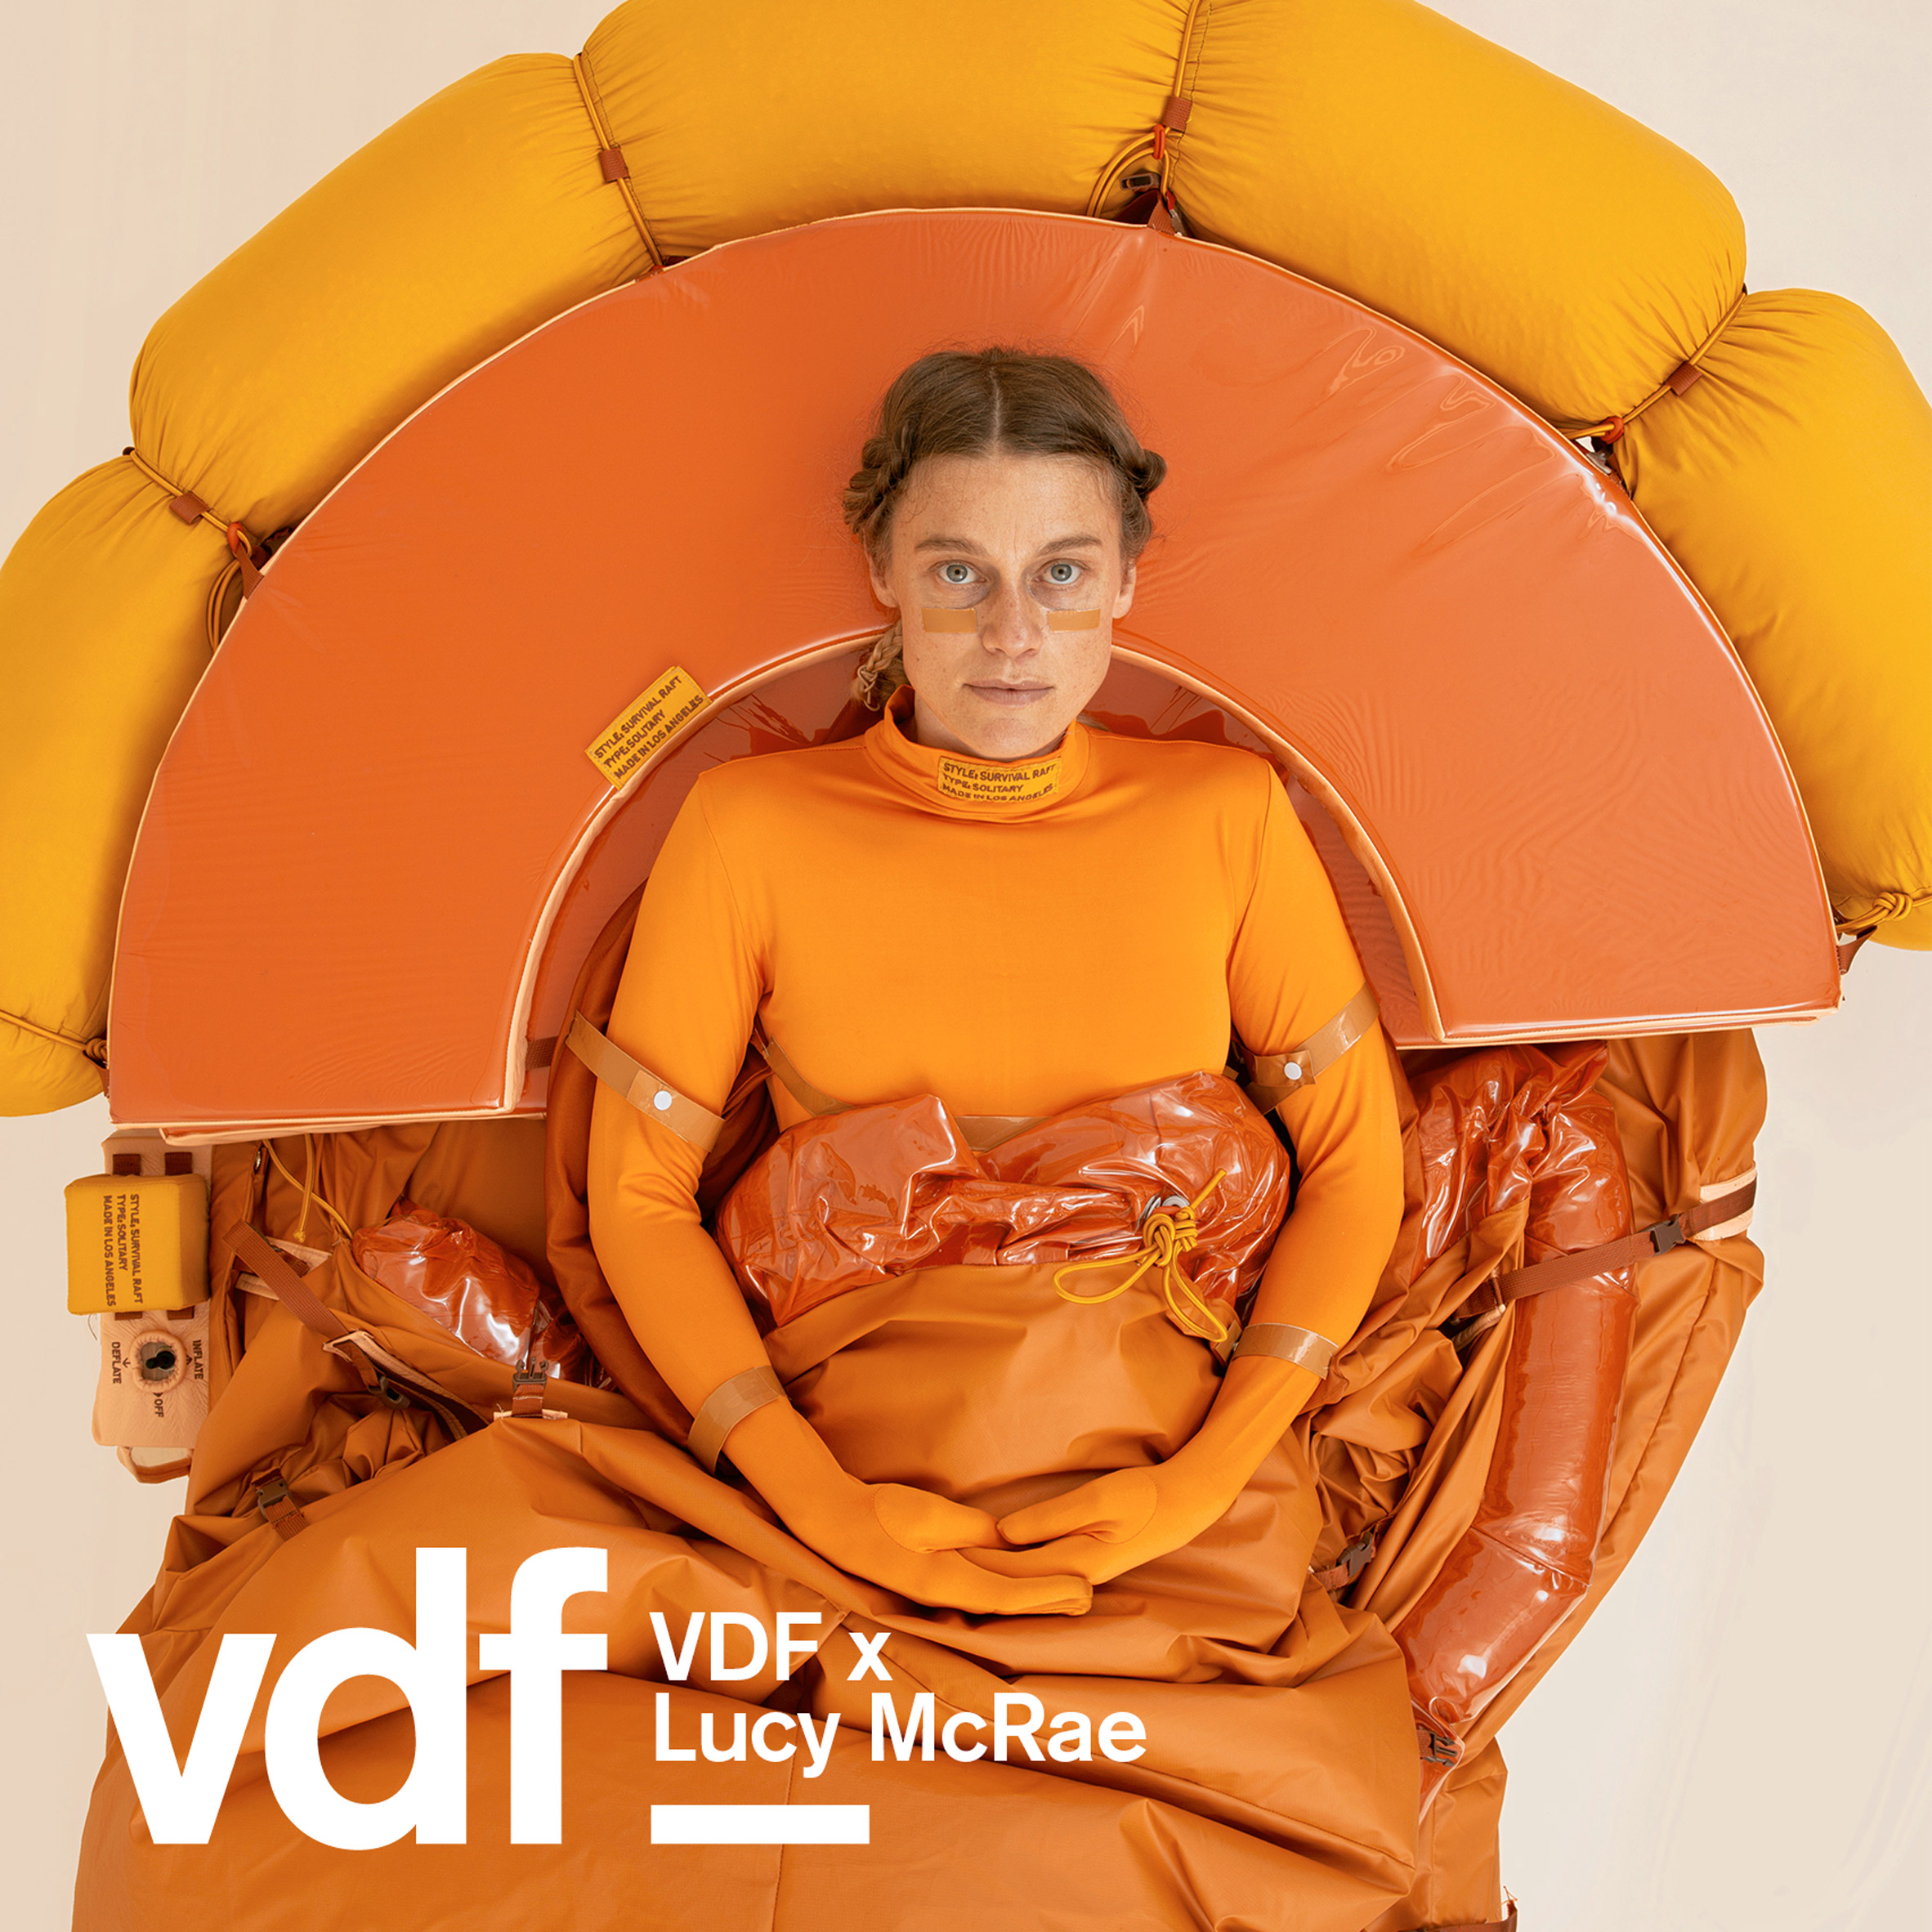 This week's VDF highlights include Lucy McRae and Imogen Heap